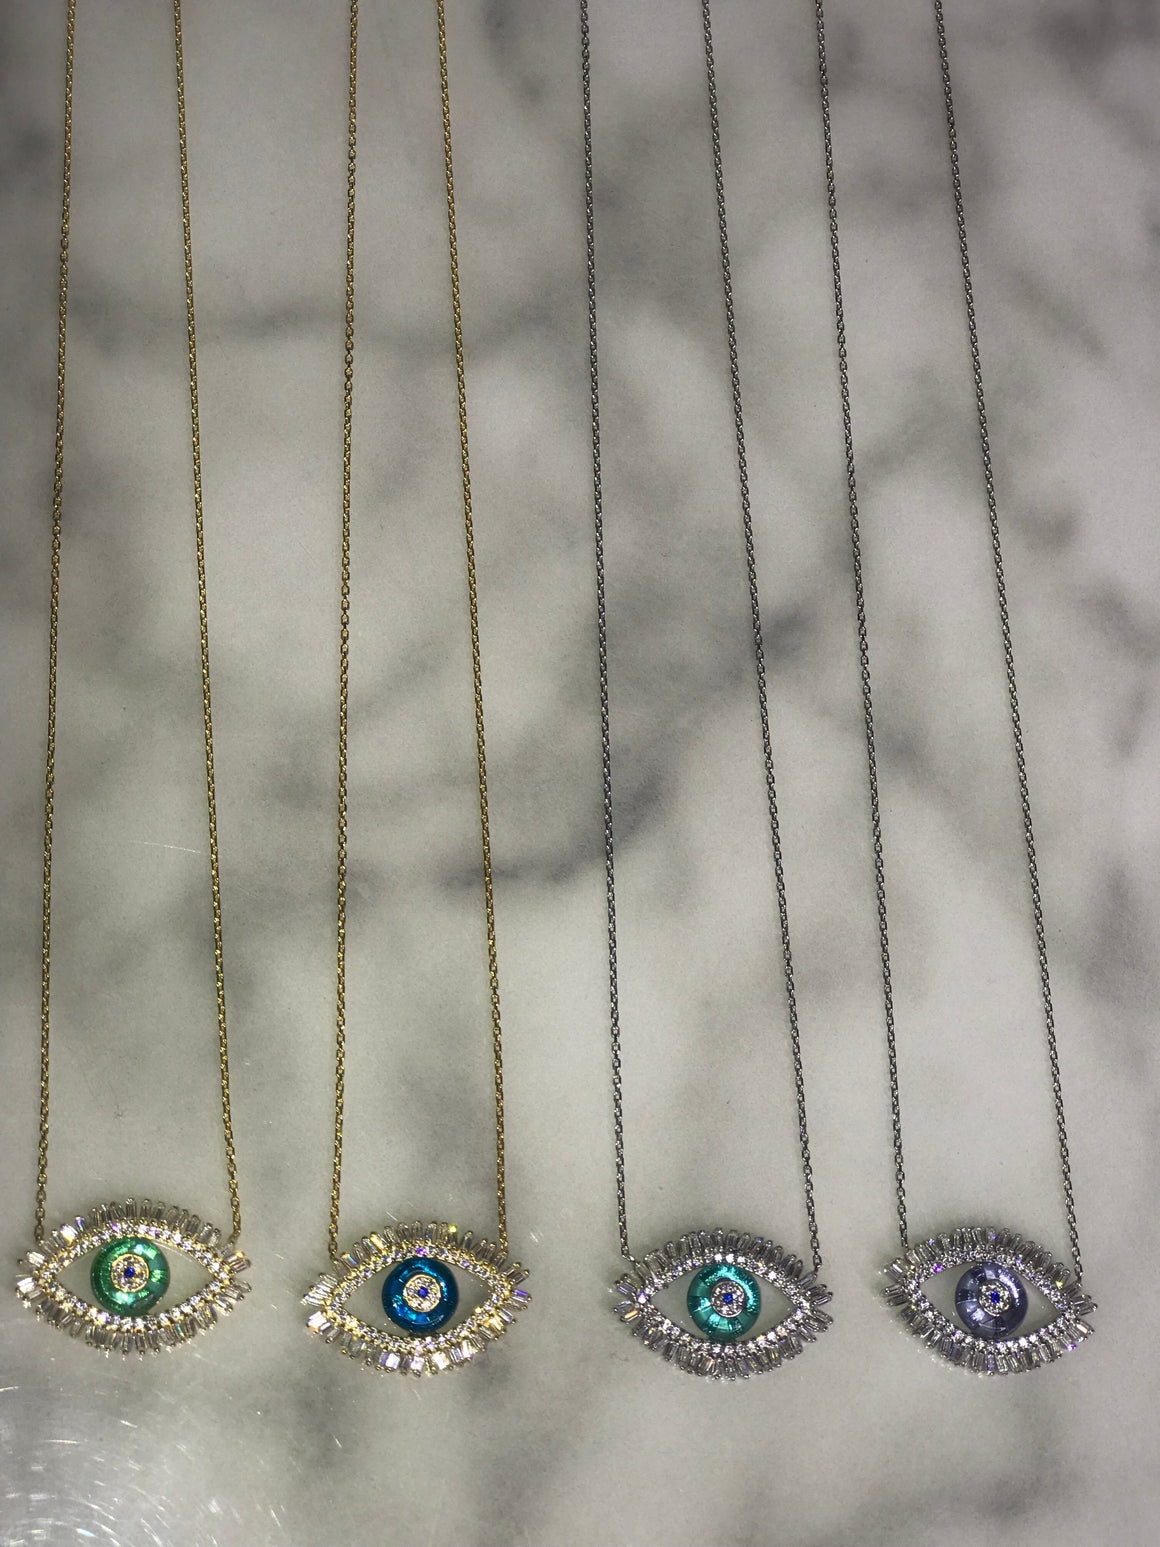 Eye baguette necklace with glass center